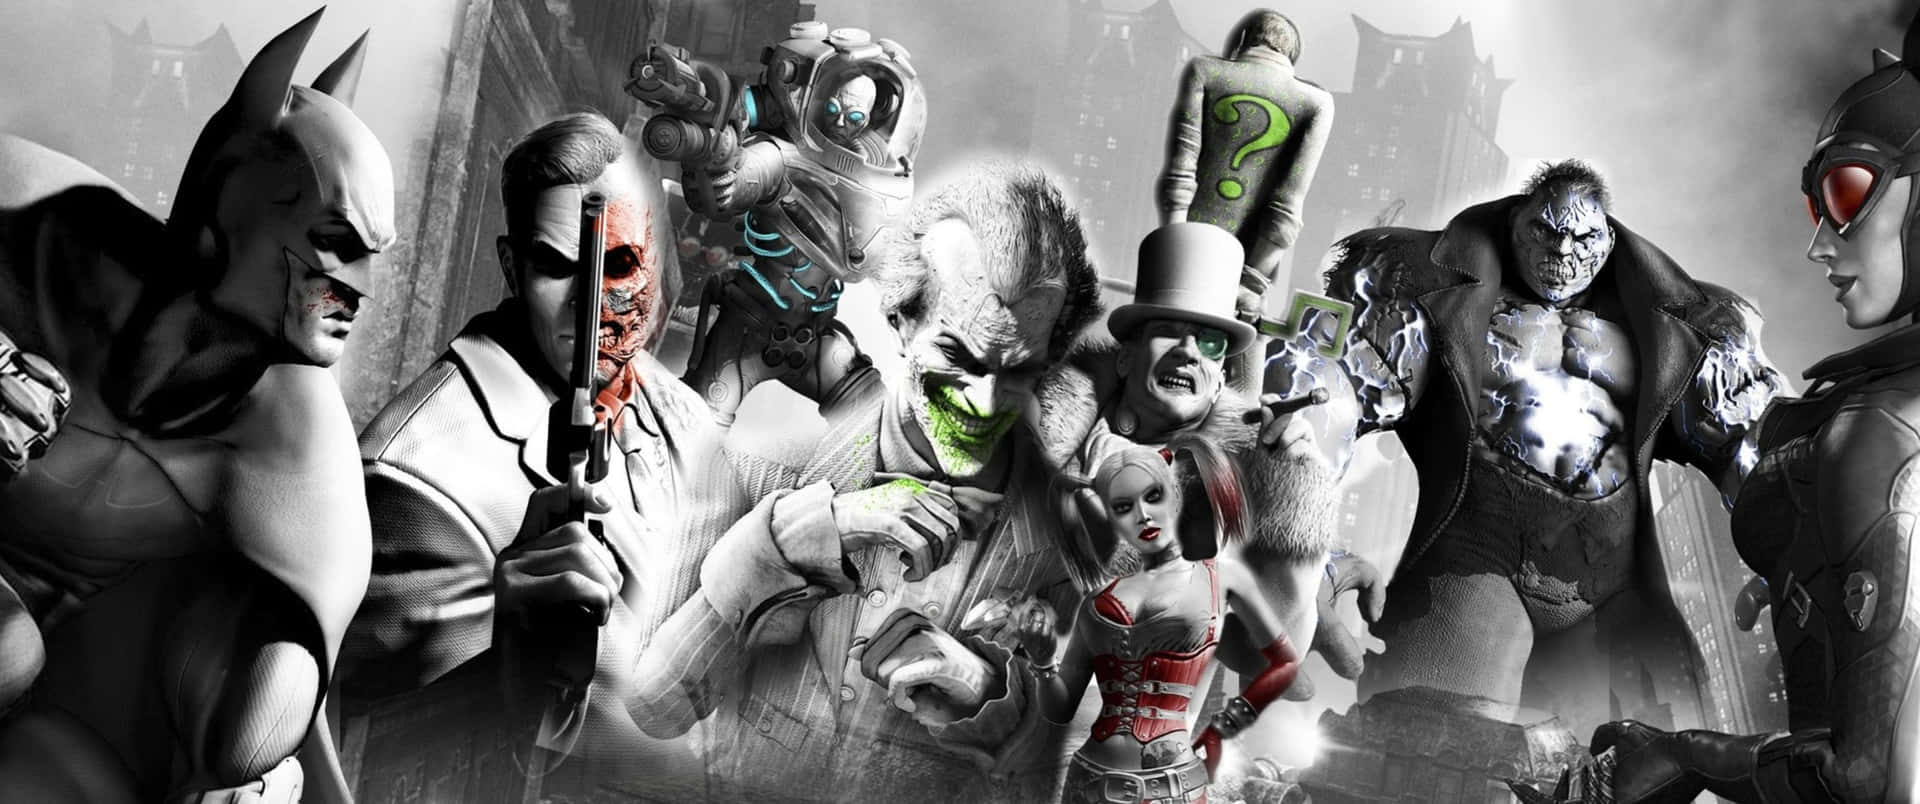 "Experience Batman Arkham City in high-resolution with a 3440x1440p background."